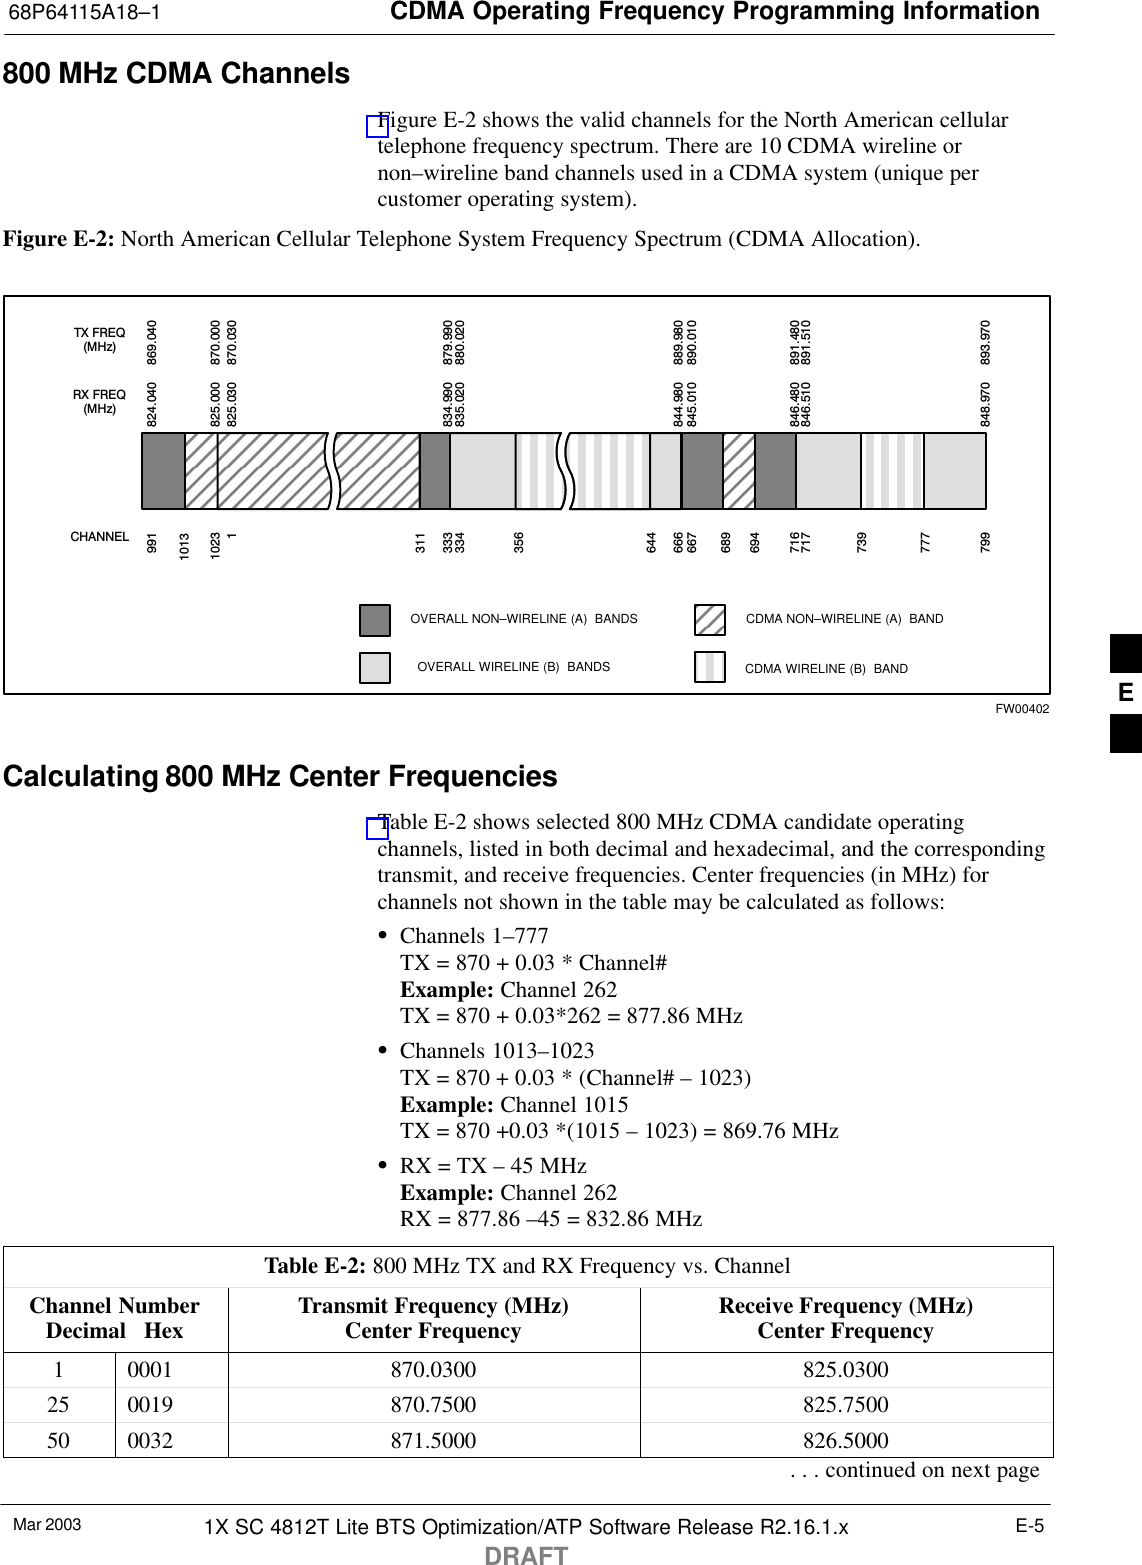 CDMA Operating Frequency Programming Information68P64115A18–1Mar 2003 1X SC 4812T Lite BTS Optimization/ATP Software Release R2.16.1.xDRAFTE-5800 MHz CDMA ChannelsFigure E-2 shows the valid channels for the North American cellulartelephone frequency spectrum. There are 10 CDMA wireline ornon–wireline band channels used in a CDMA system (unique percustomer operating system).Figure E-2: North American Cellular Telephone System Frequency Spectrum (CDMA Allocation).RX  FREQ(MHz)99110231333334666667716717799CHANNELOVERALL NON–WIRELINE (A)  BANDSOVERALL WIRELINE (B)  BANDS824.040825.000825.030834.990835.020844.980845.010846.480846.510848.970869.040870.000870.030879.990880.020889.980890.010891.480891.510893.970TX  FREQ(MHz)1013694689311356644739777CDMA NON–WIRELINE (A)  BANDCDMA WIRELINE (B)  BANDFW00402Calculating 800 MHz Center FrequenciesTable E-2 shows selected 800 MHz CDMA candidate operatingchannels, listed in both decimal and hexadecimal, and the correspondingtransmit, and receive frequencies. Center frequencies (in MHz) forchannels not shown in the table may be calculated as follows:SChannels 1–777TX = 870 + 0.03 * Channel#Example: Channel 262TX = 870 + 0.03*262 = 877.86 MHzSChannels 1013–1023TX = 870 + 0.03 * (Channel# – 1023)Example: Channel 1015TX = 870 +0.03 *(1015 – 1023) = 869.76 MHzSRX = TX – 45 MHzExample: Channel 262RX = 877.86 –45 = 832.86 MHzTable E-2: 800 MHz TX and RX Frequency vs. ChannelChannel NumberDecimal   Hex Transmit Frequency (MHz)Center Frequency Receive Frequency (MHz)Center Frequency1 0001 870.0300 825.030025 0019 870.7500 825.750050 0032 871.5000 826.5000. . . continued on next pageE